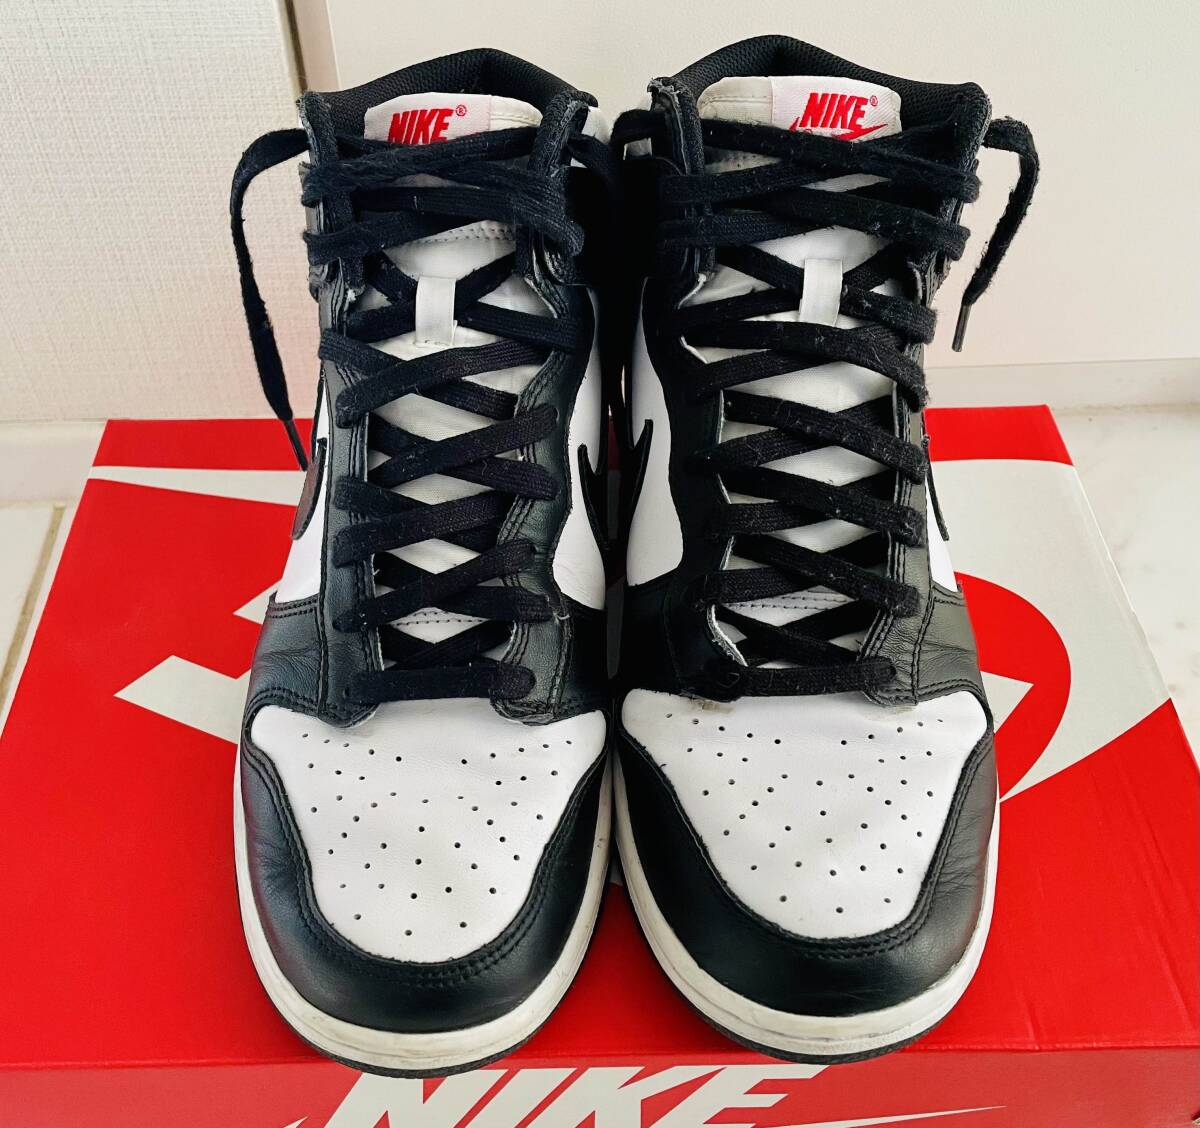 NIKE DUNK HIGH "BLACK AND WHITE" US9 27㎝の画像2